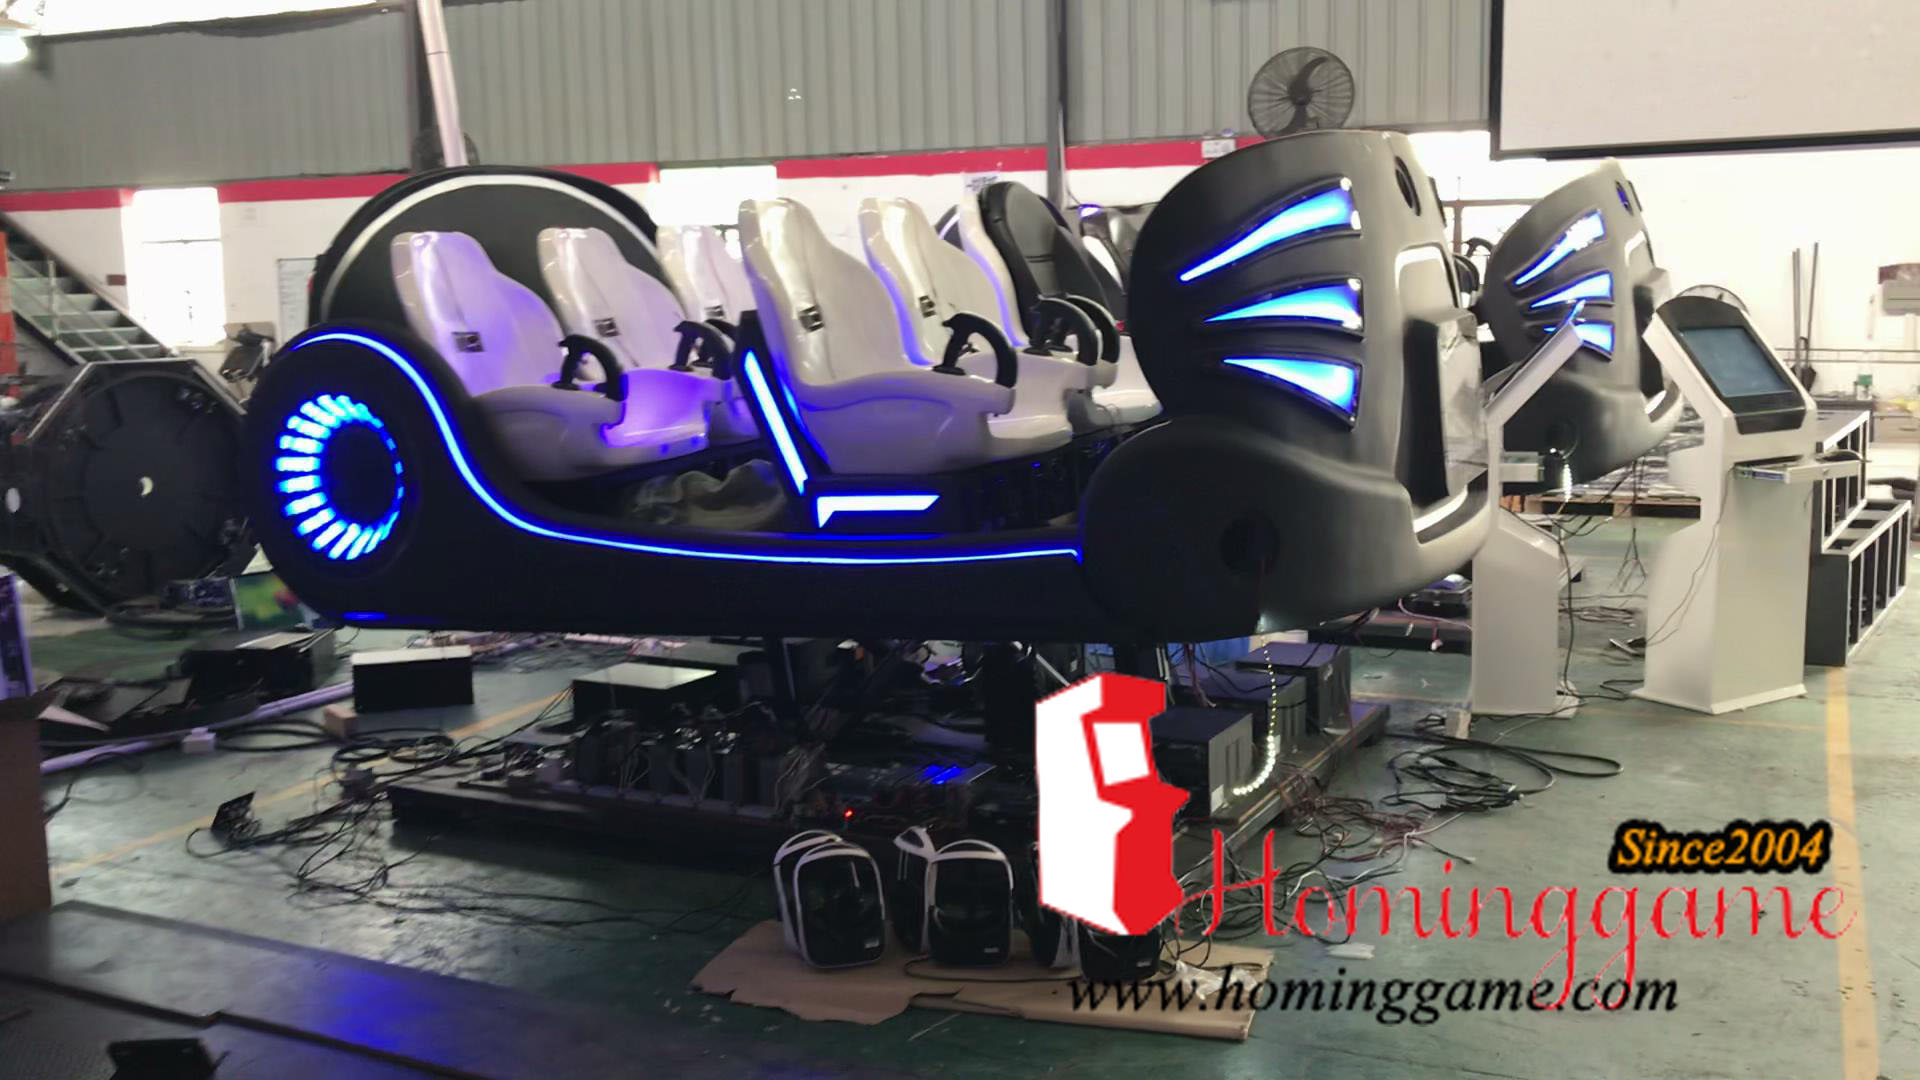 2018 Hot 3 Seats 9D VR Egss Reality Game Machine,2 Seats 9D VR Egg Reality Game Machine,9D VR Cinema Egg Game,9D VR game,VR Game,9D VR,VR game machine,9D VR cinema,9D VR theater,9D,9D Machine,VR Egg,Single VR egg,Double 9D VR egg, 3 Player 9D VR egg,9D VR Bike,9D VR 6 seats Theater,6 seats VR theater,9D Cinema,9D racing Car Game Machine,9D VR gun shooting game machine,9D VR airplane,9D VR simulator game machine,Game Machine,Arcade Game Machine,Coin Operated Game Machine,Amusement park game machine,Simulator game machine,Indoor game machine,Family Entertainment,Entertainment game machine